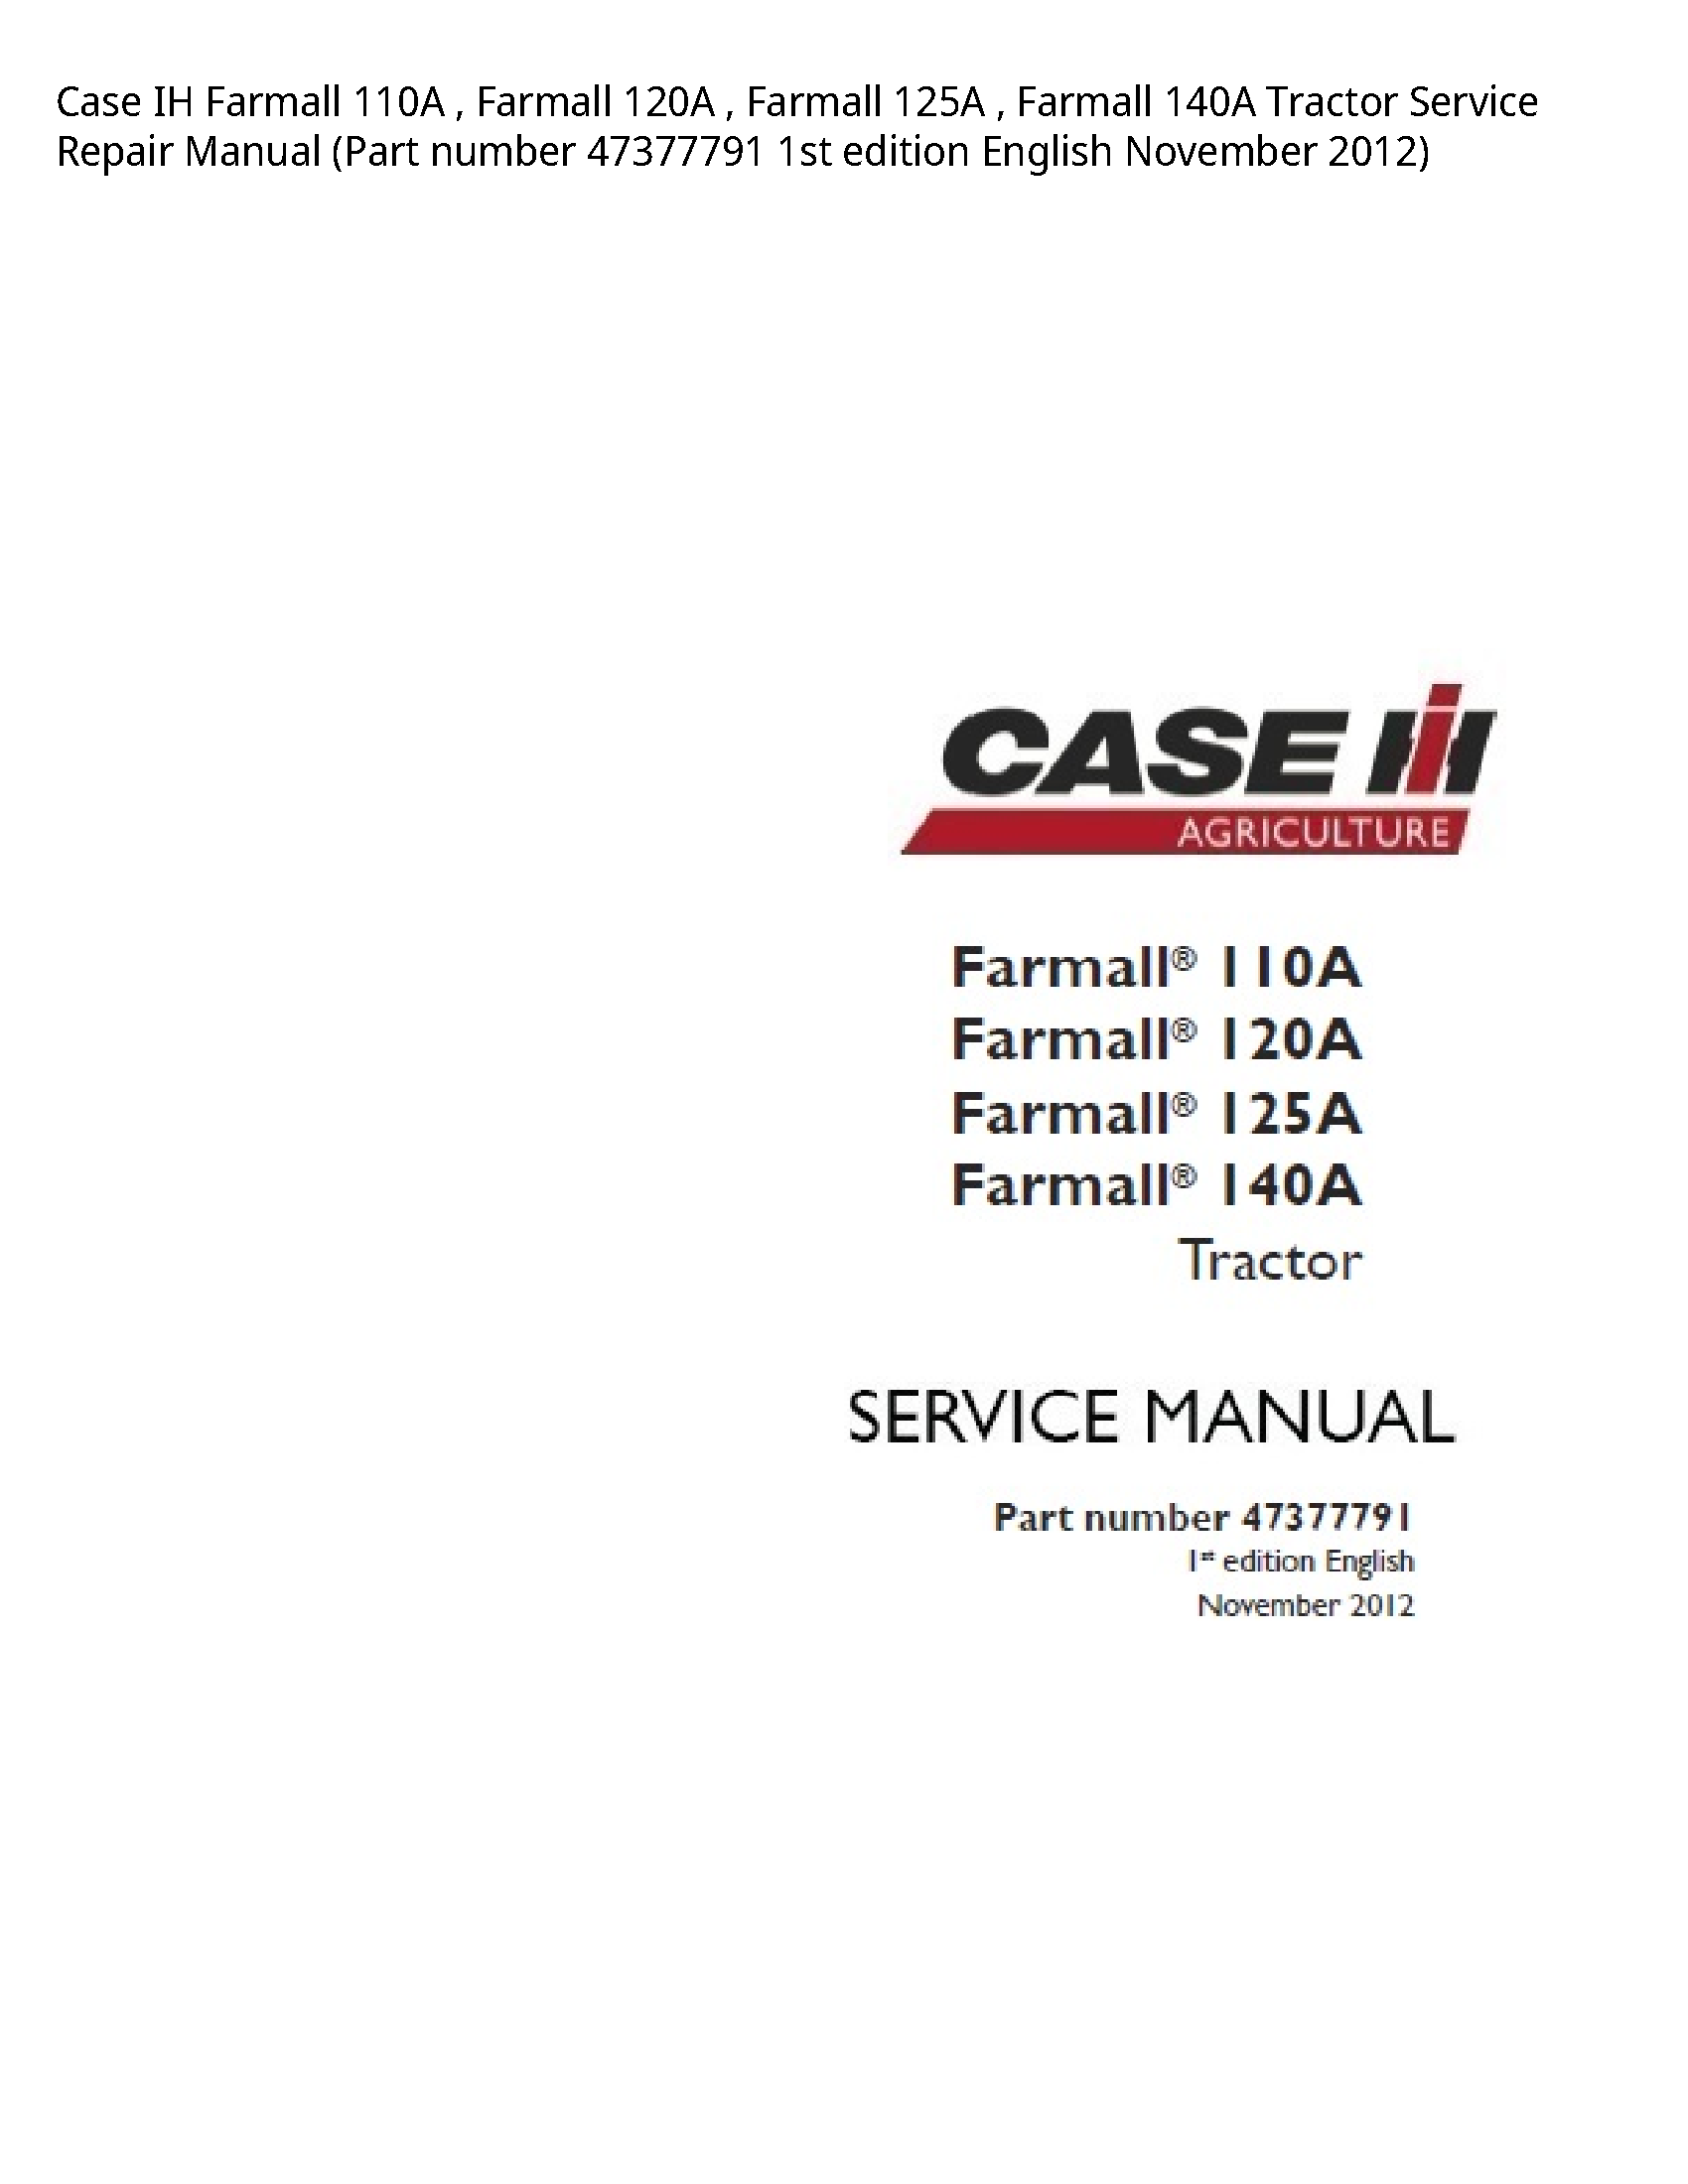 Case/Case IH 110A IH Farmall Farmall Farmall Farmall Tractor manual